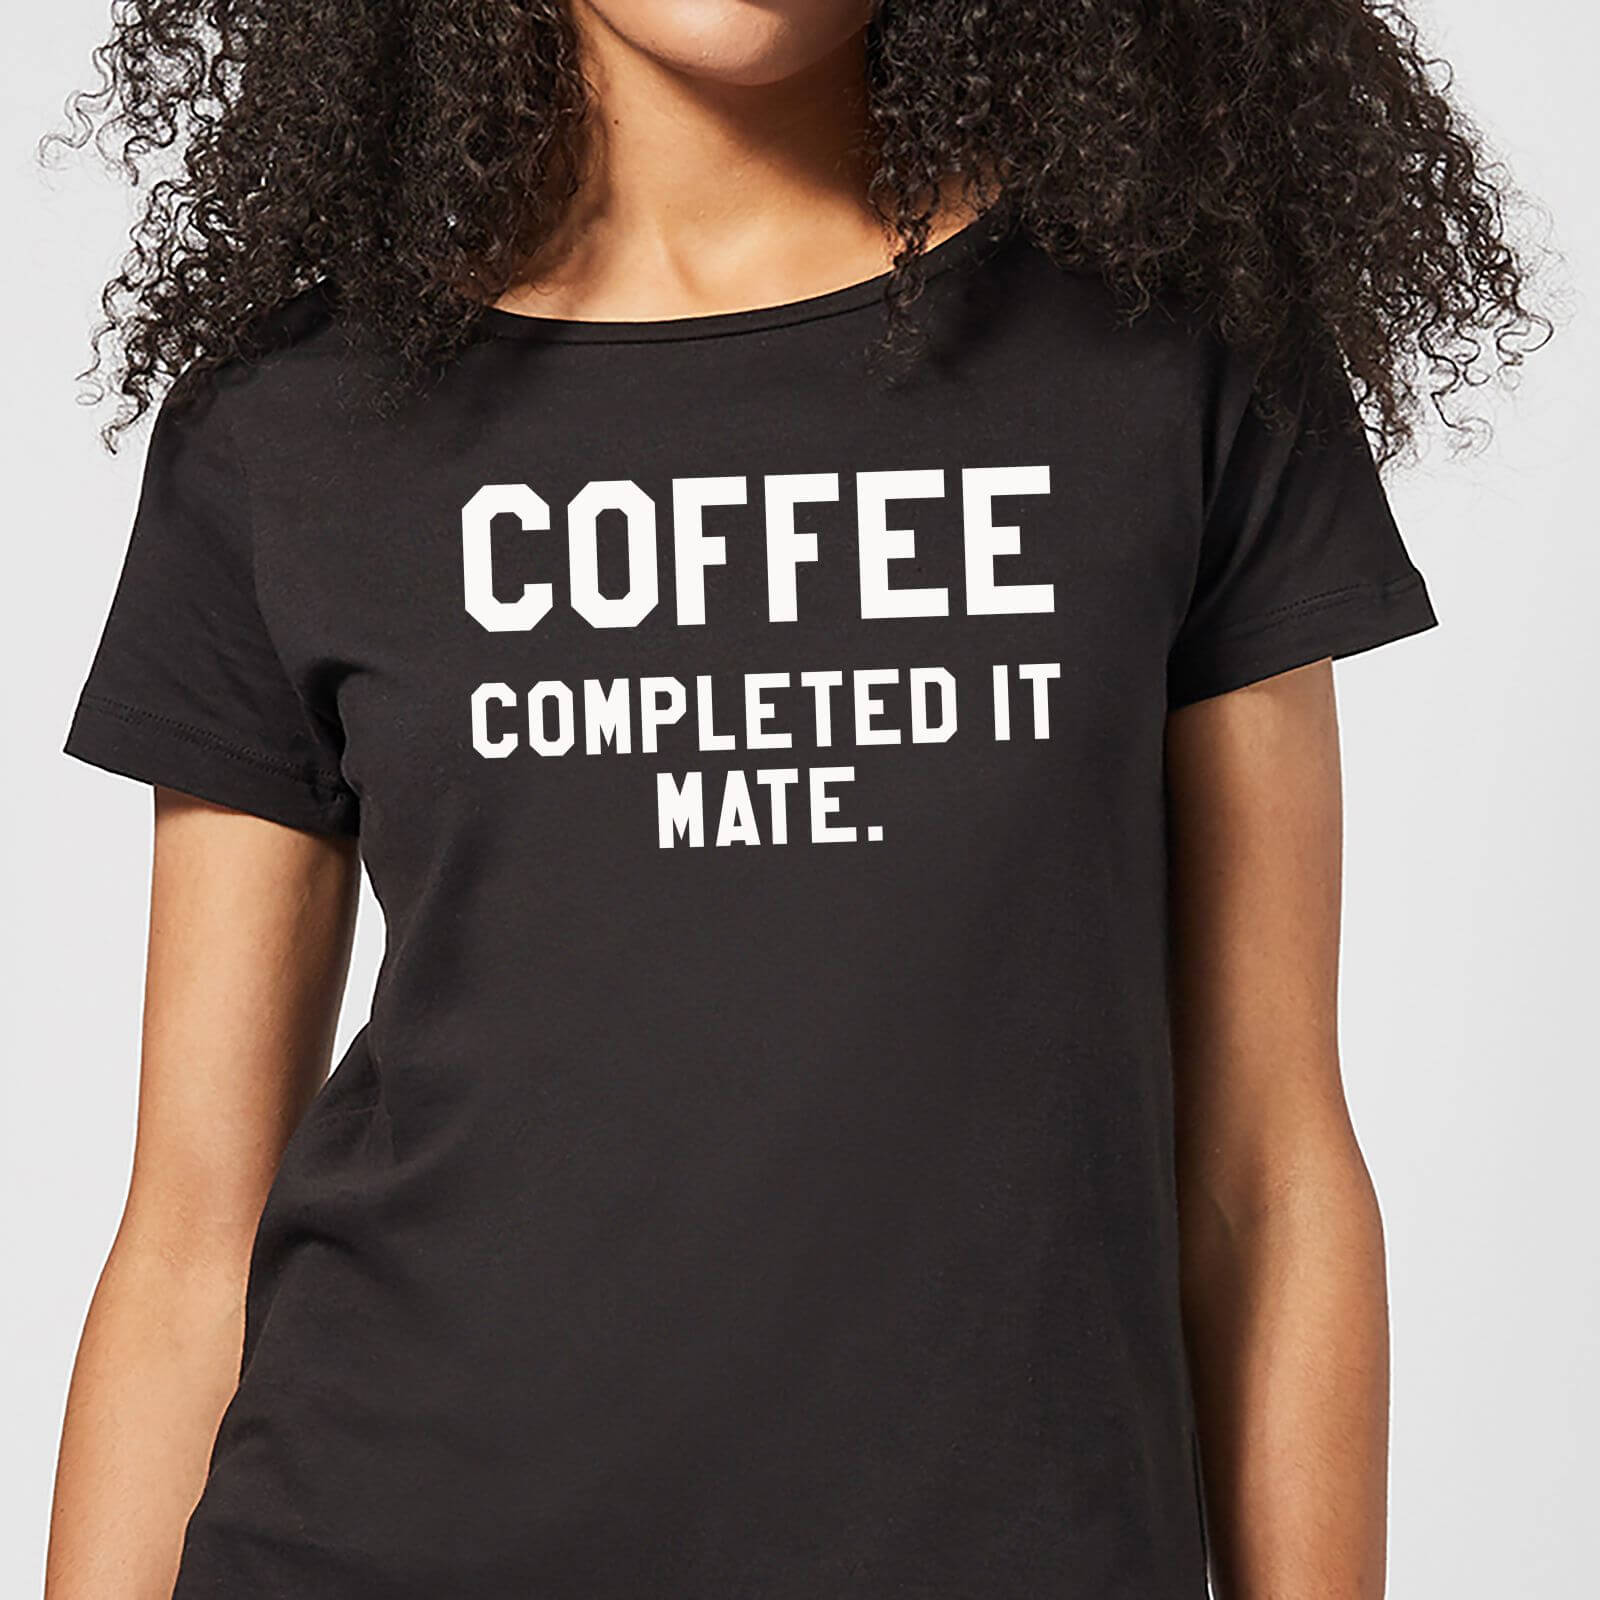 Coffee Completed it Mate Women's T-Shirt - Black - 3XL - Black